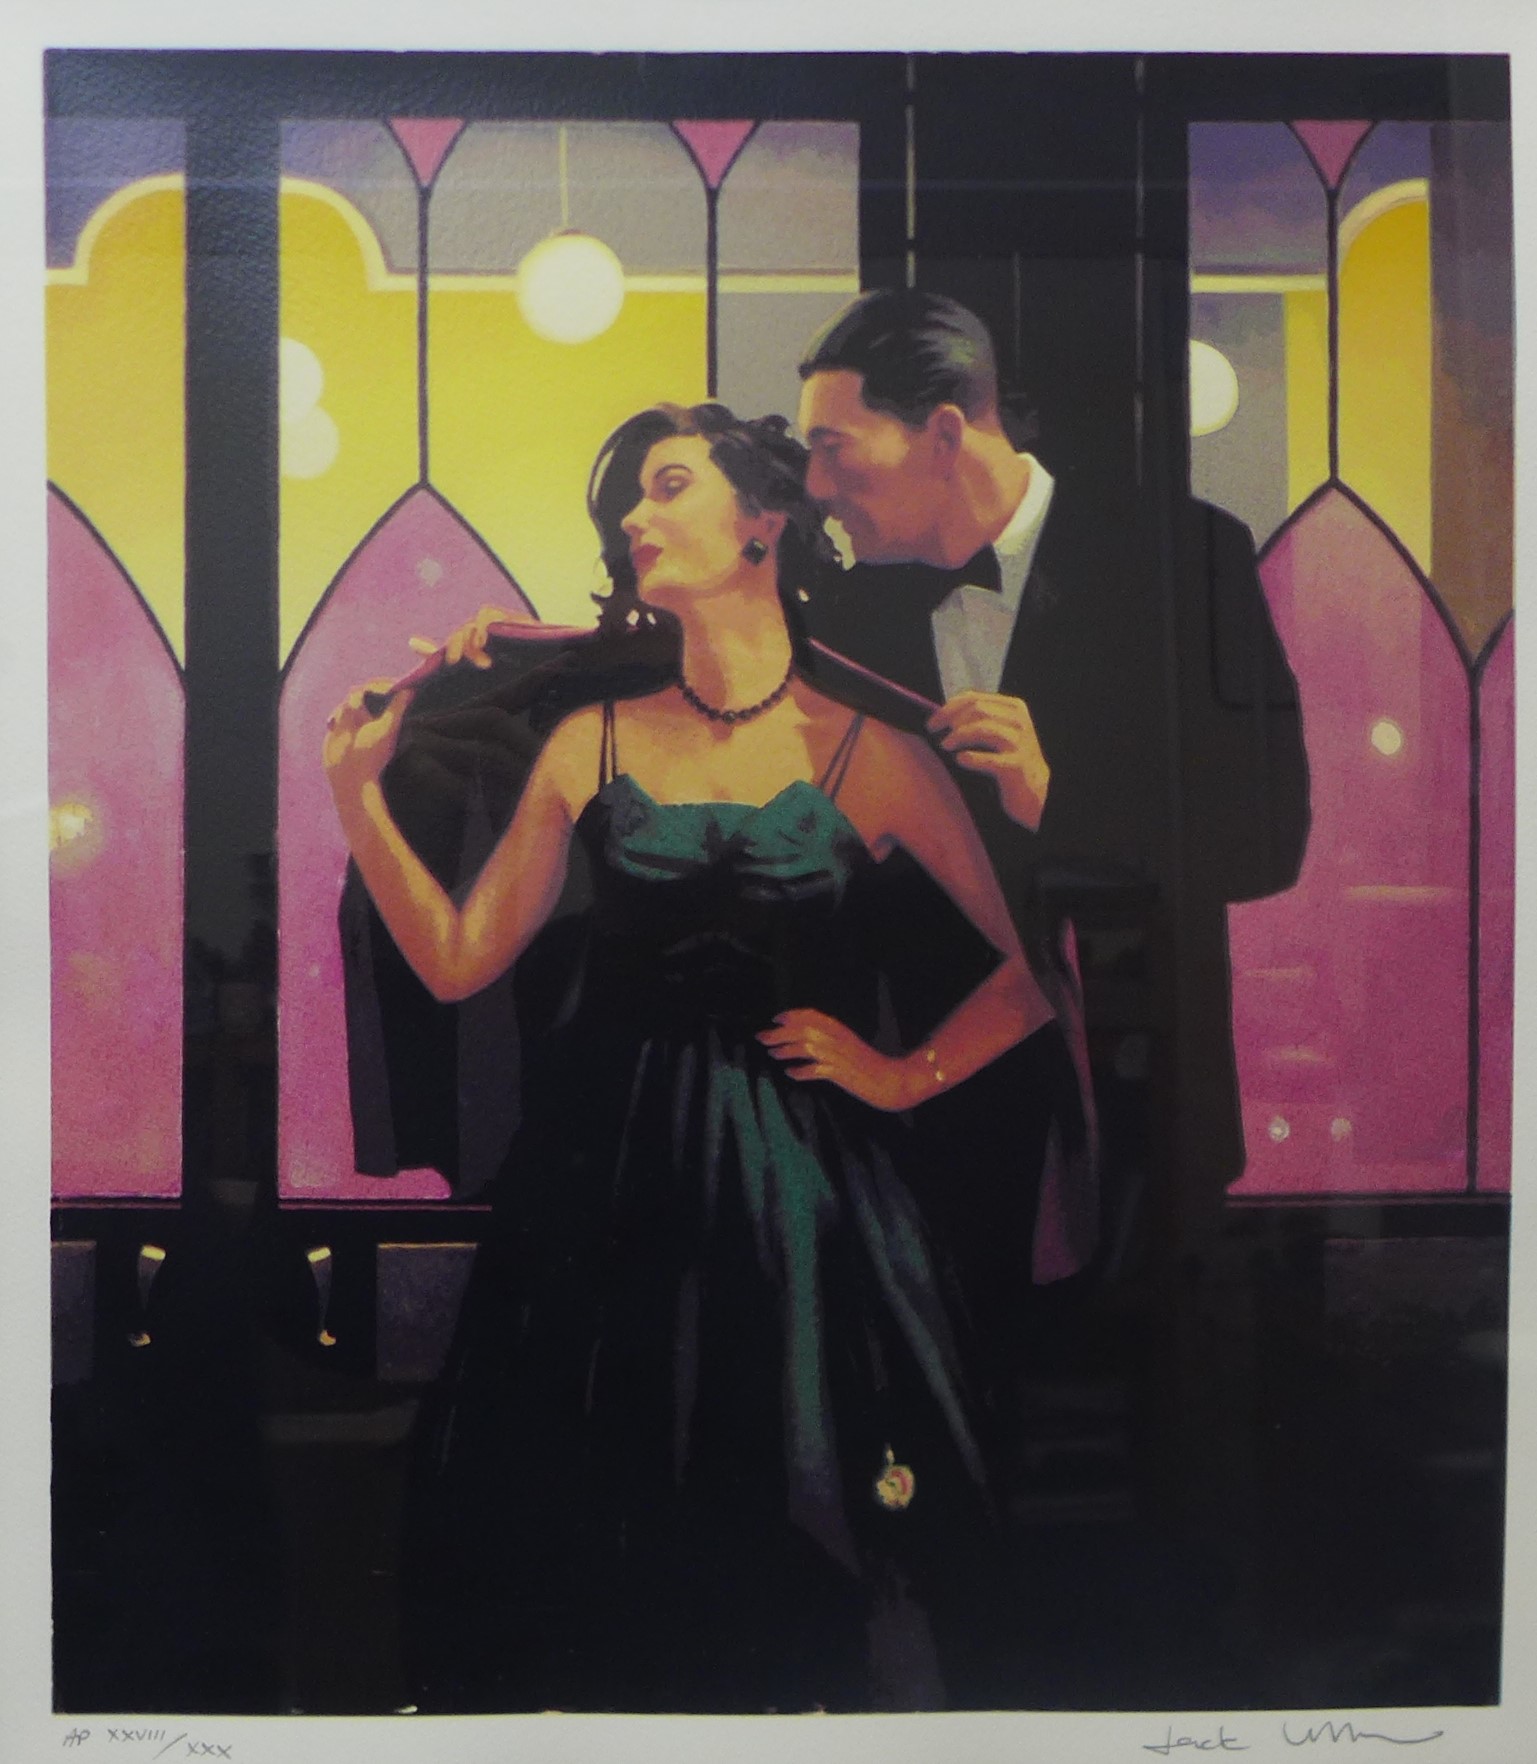 A signed Jack Vettriano limited edition artist proof print, 50 x 44cms, framed